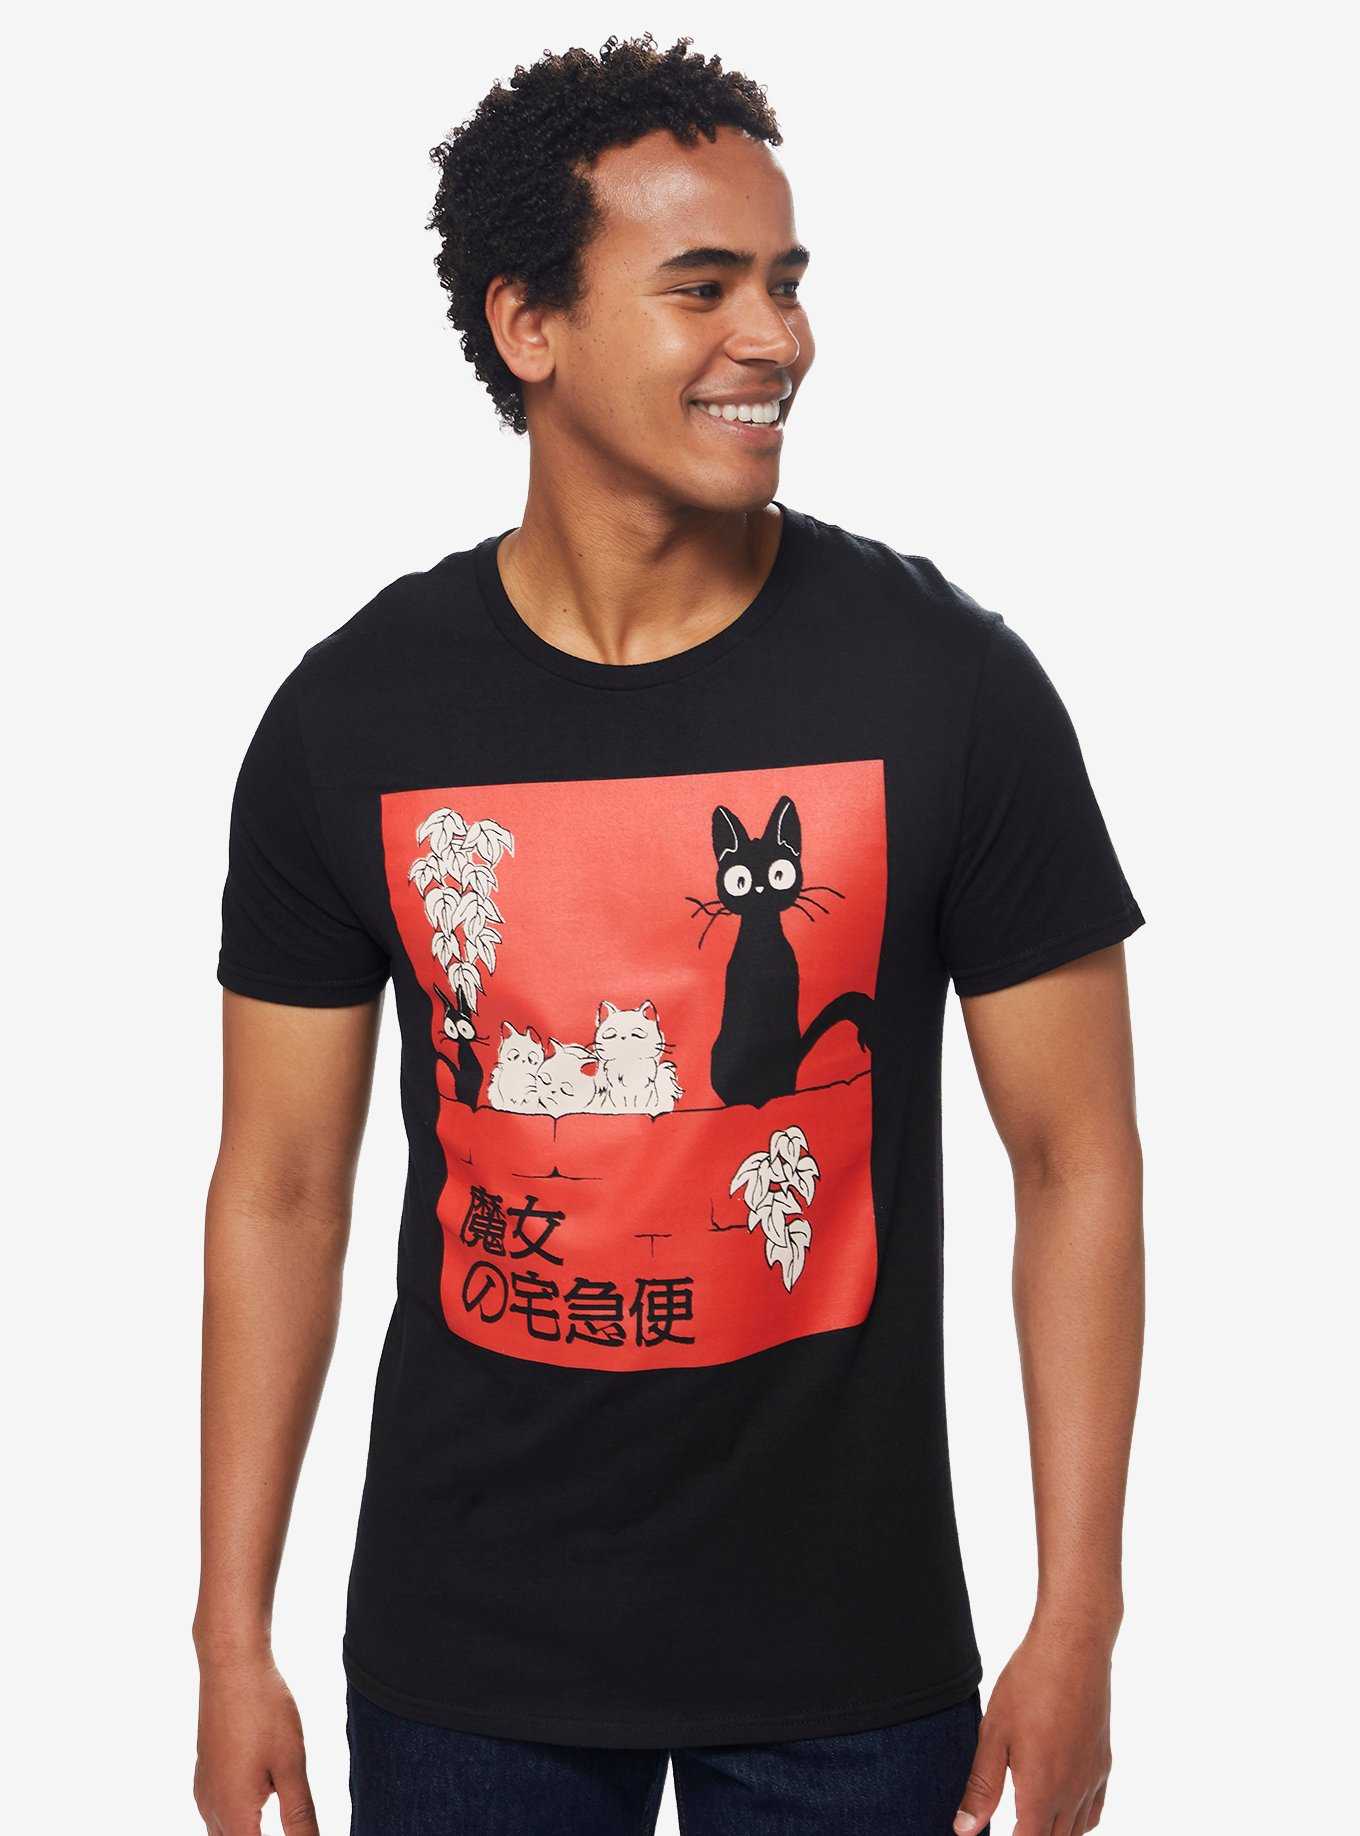 Studio Ghibli Kiki's Delivery Service Jiji with Kittens T-Shirt - BoxLunch Exclusive, , hi-res